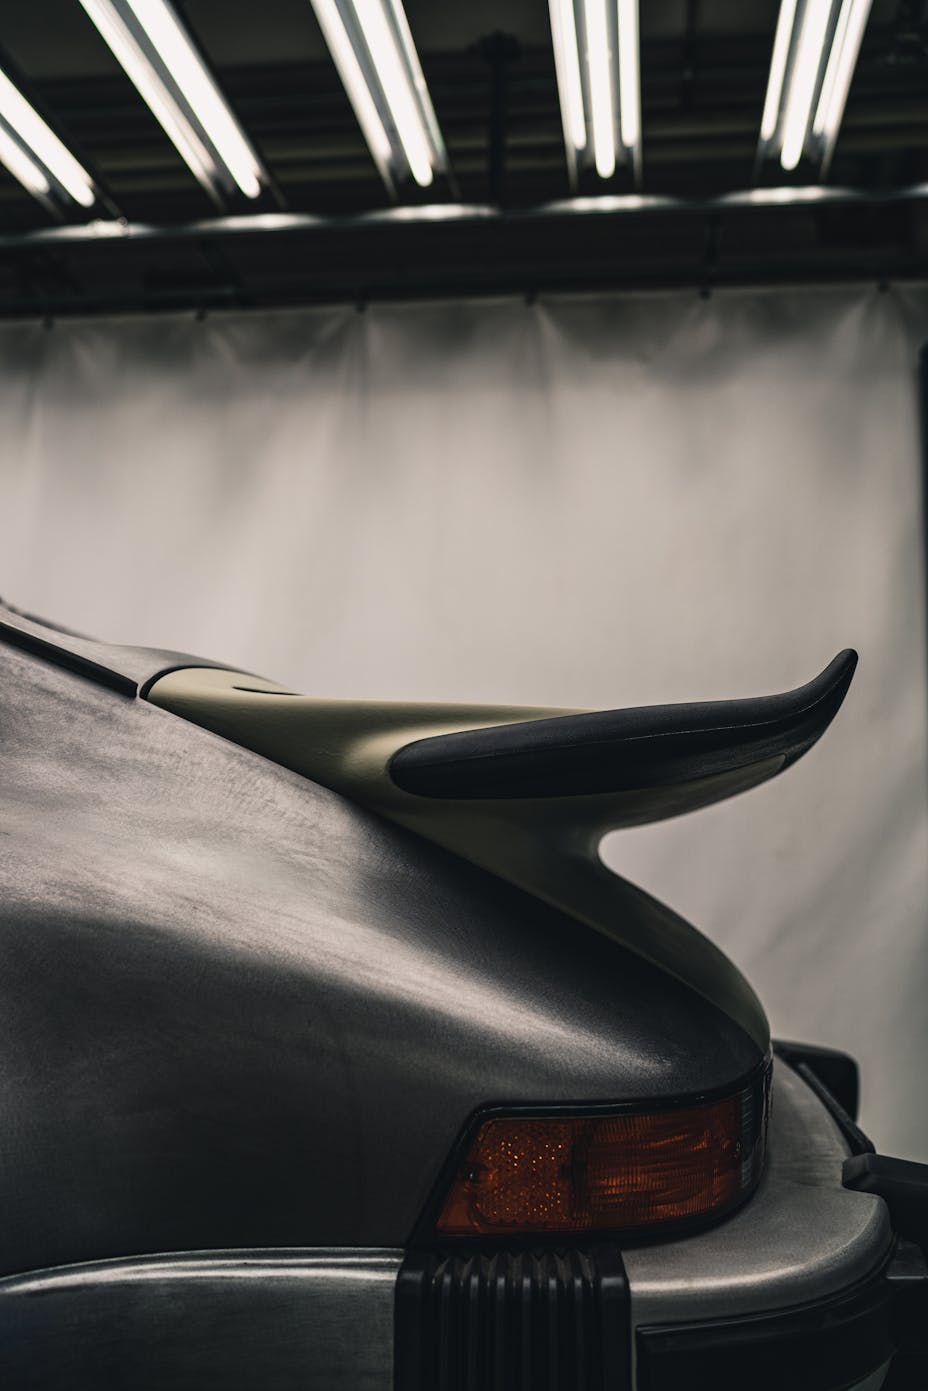 Close-up shot of whale tail rear wing on silver Porsche